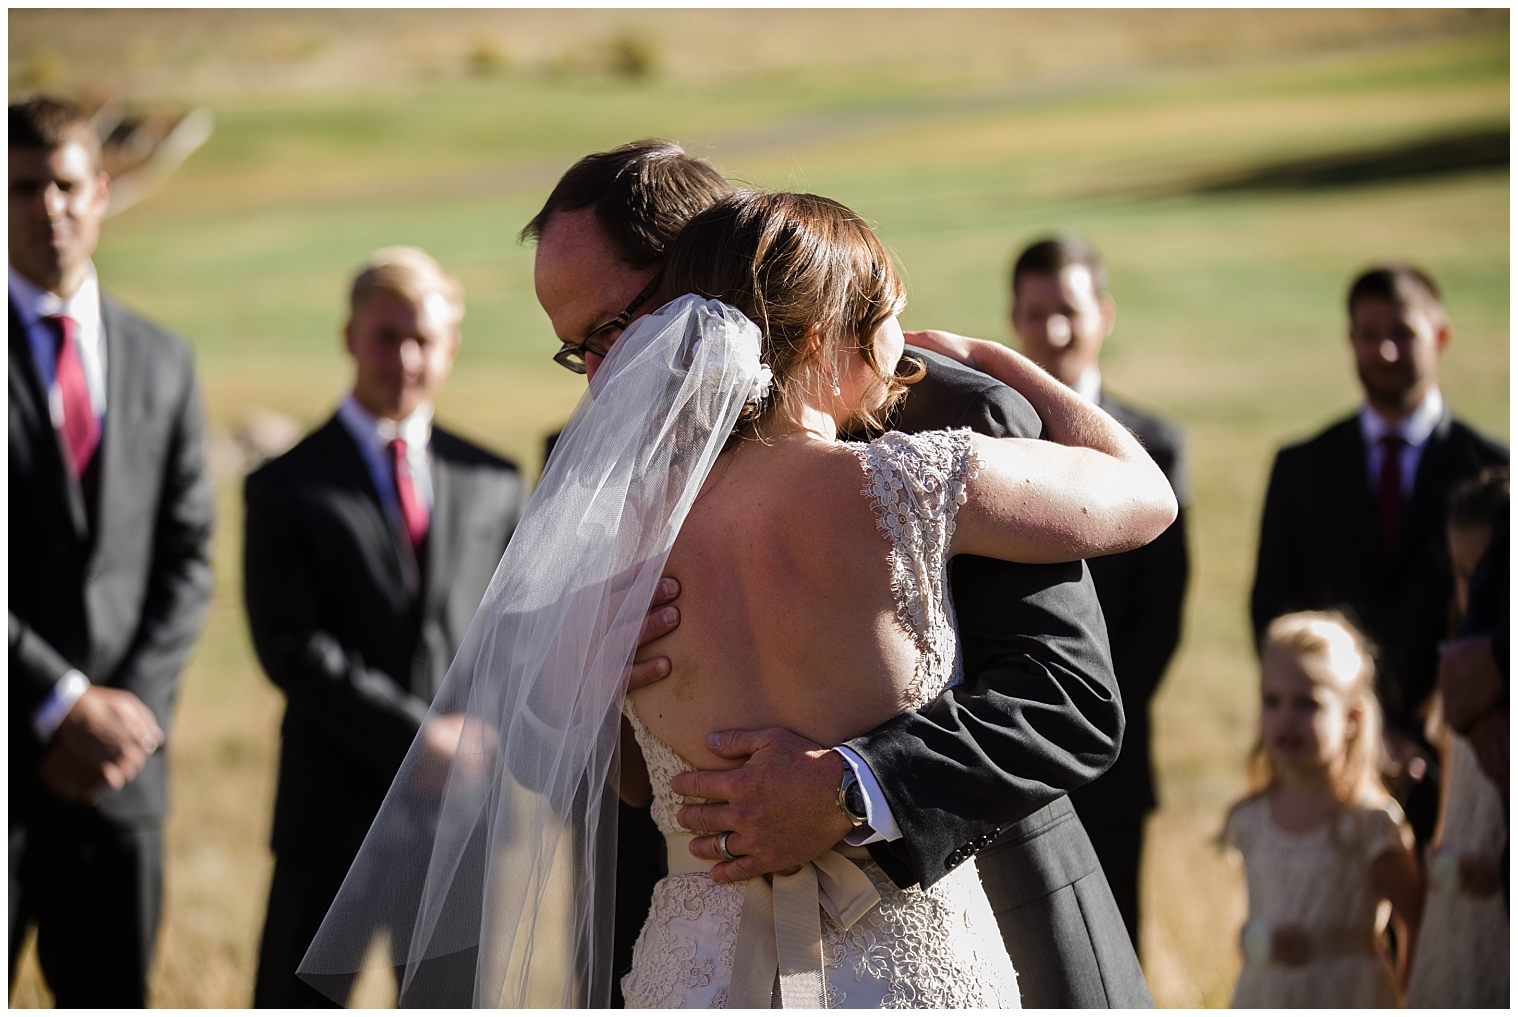 The bride hugs her father, as he walks her down the aisle at her Copper Mountain wedding ceremony.